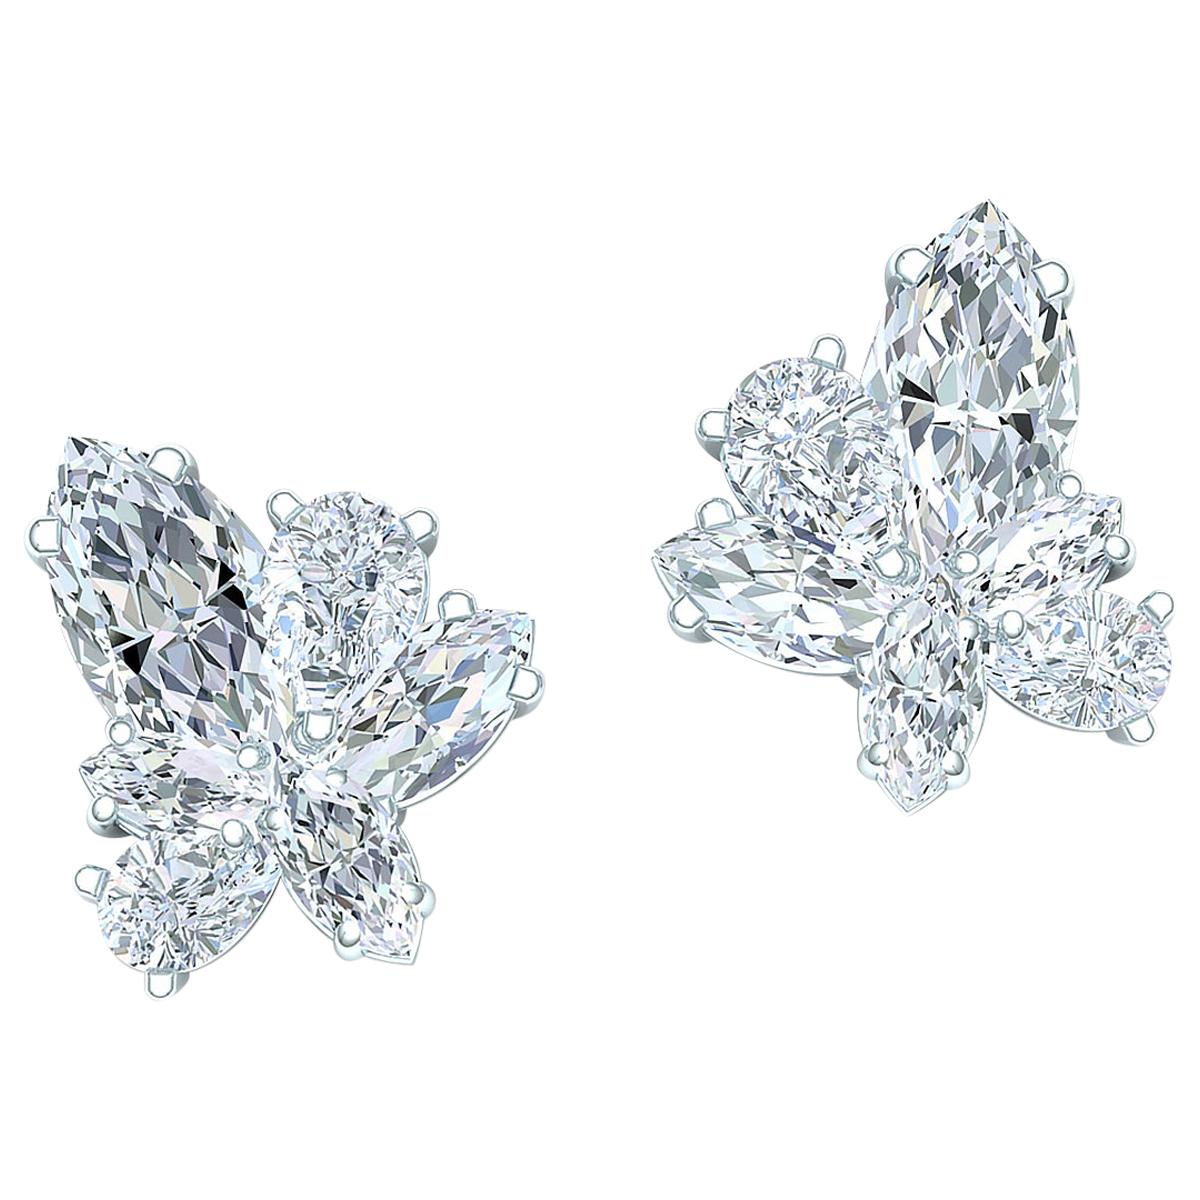 5 Carat Marquise and Pear Diamond Cluster Earrings Platinum